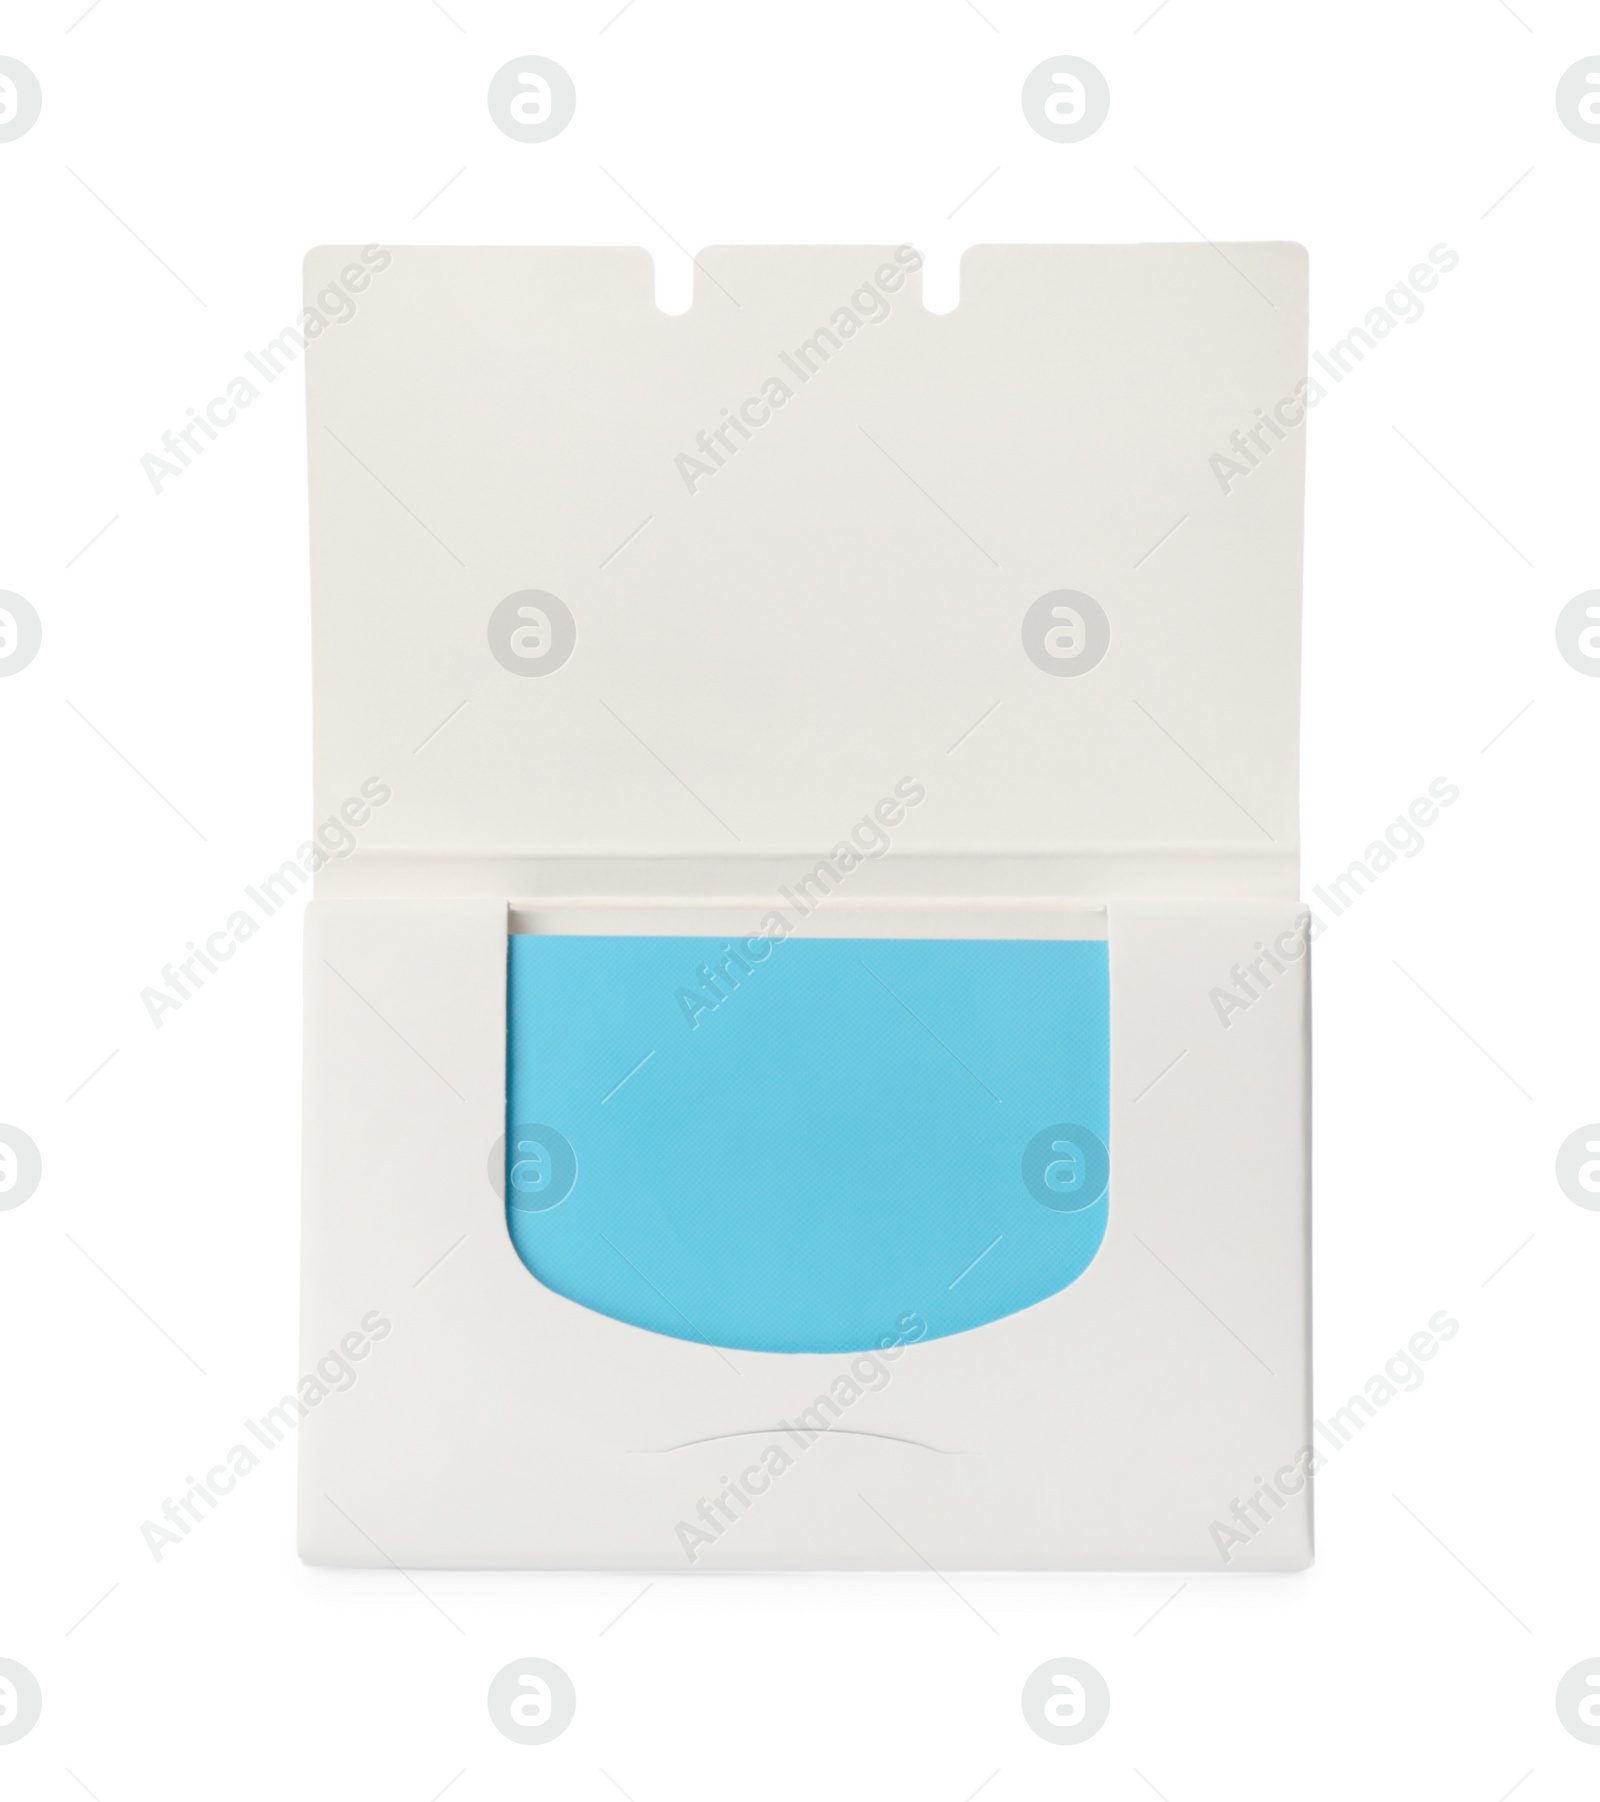 Photo of Open package of facial oil blotting tissues isolated on white